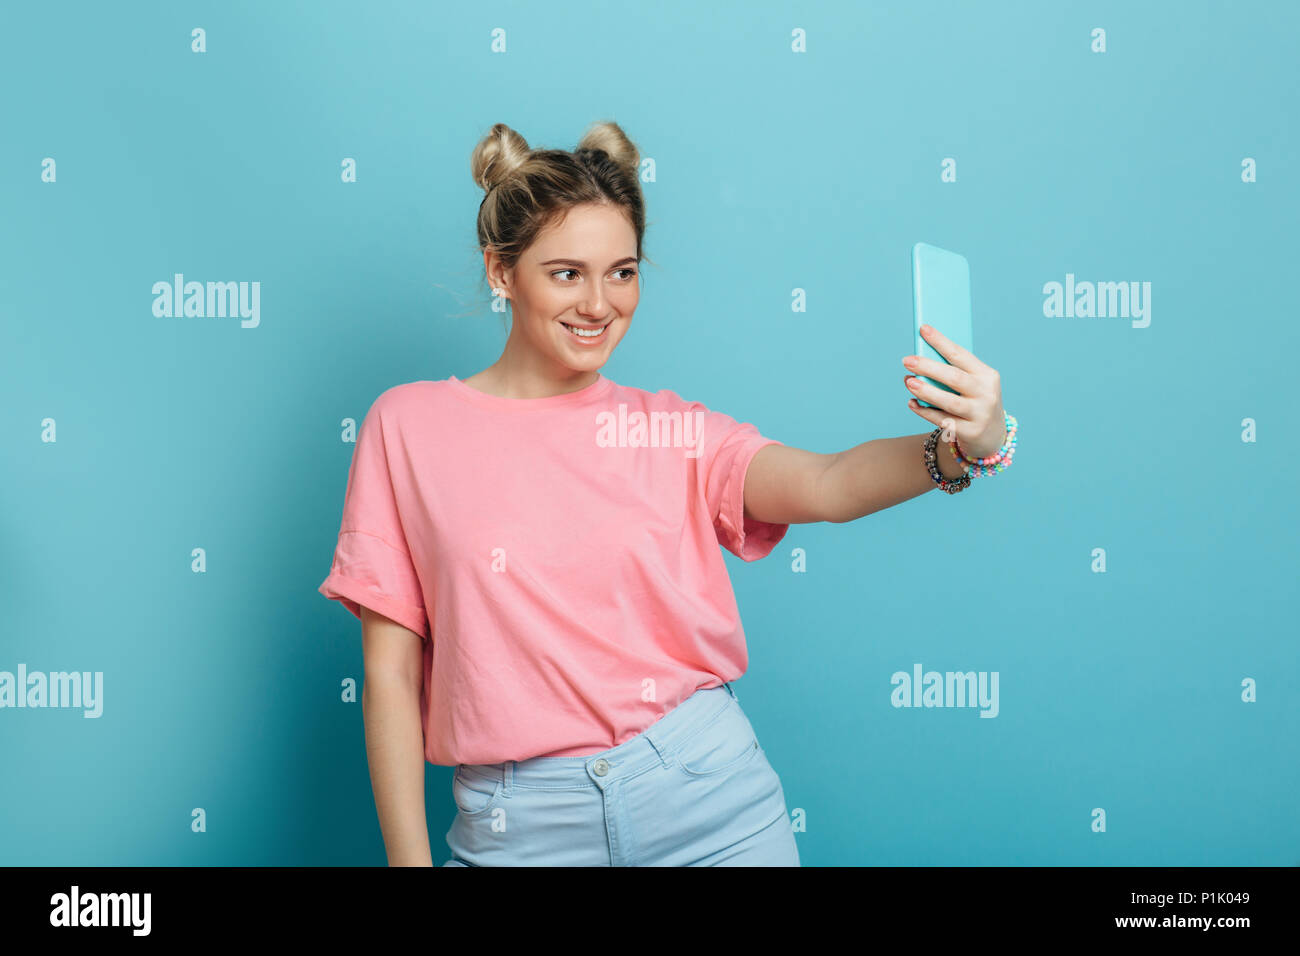 youth trendy woman making photo on her smartphone against a blue pastel background . making cool selfie Stock Photo